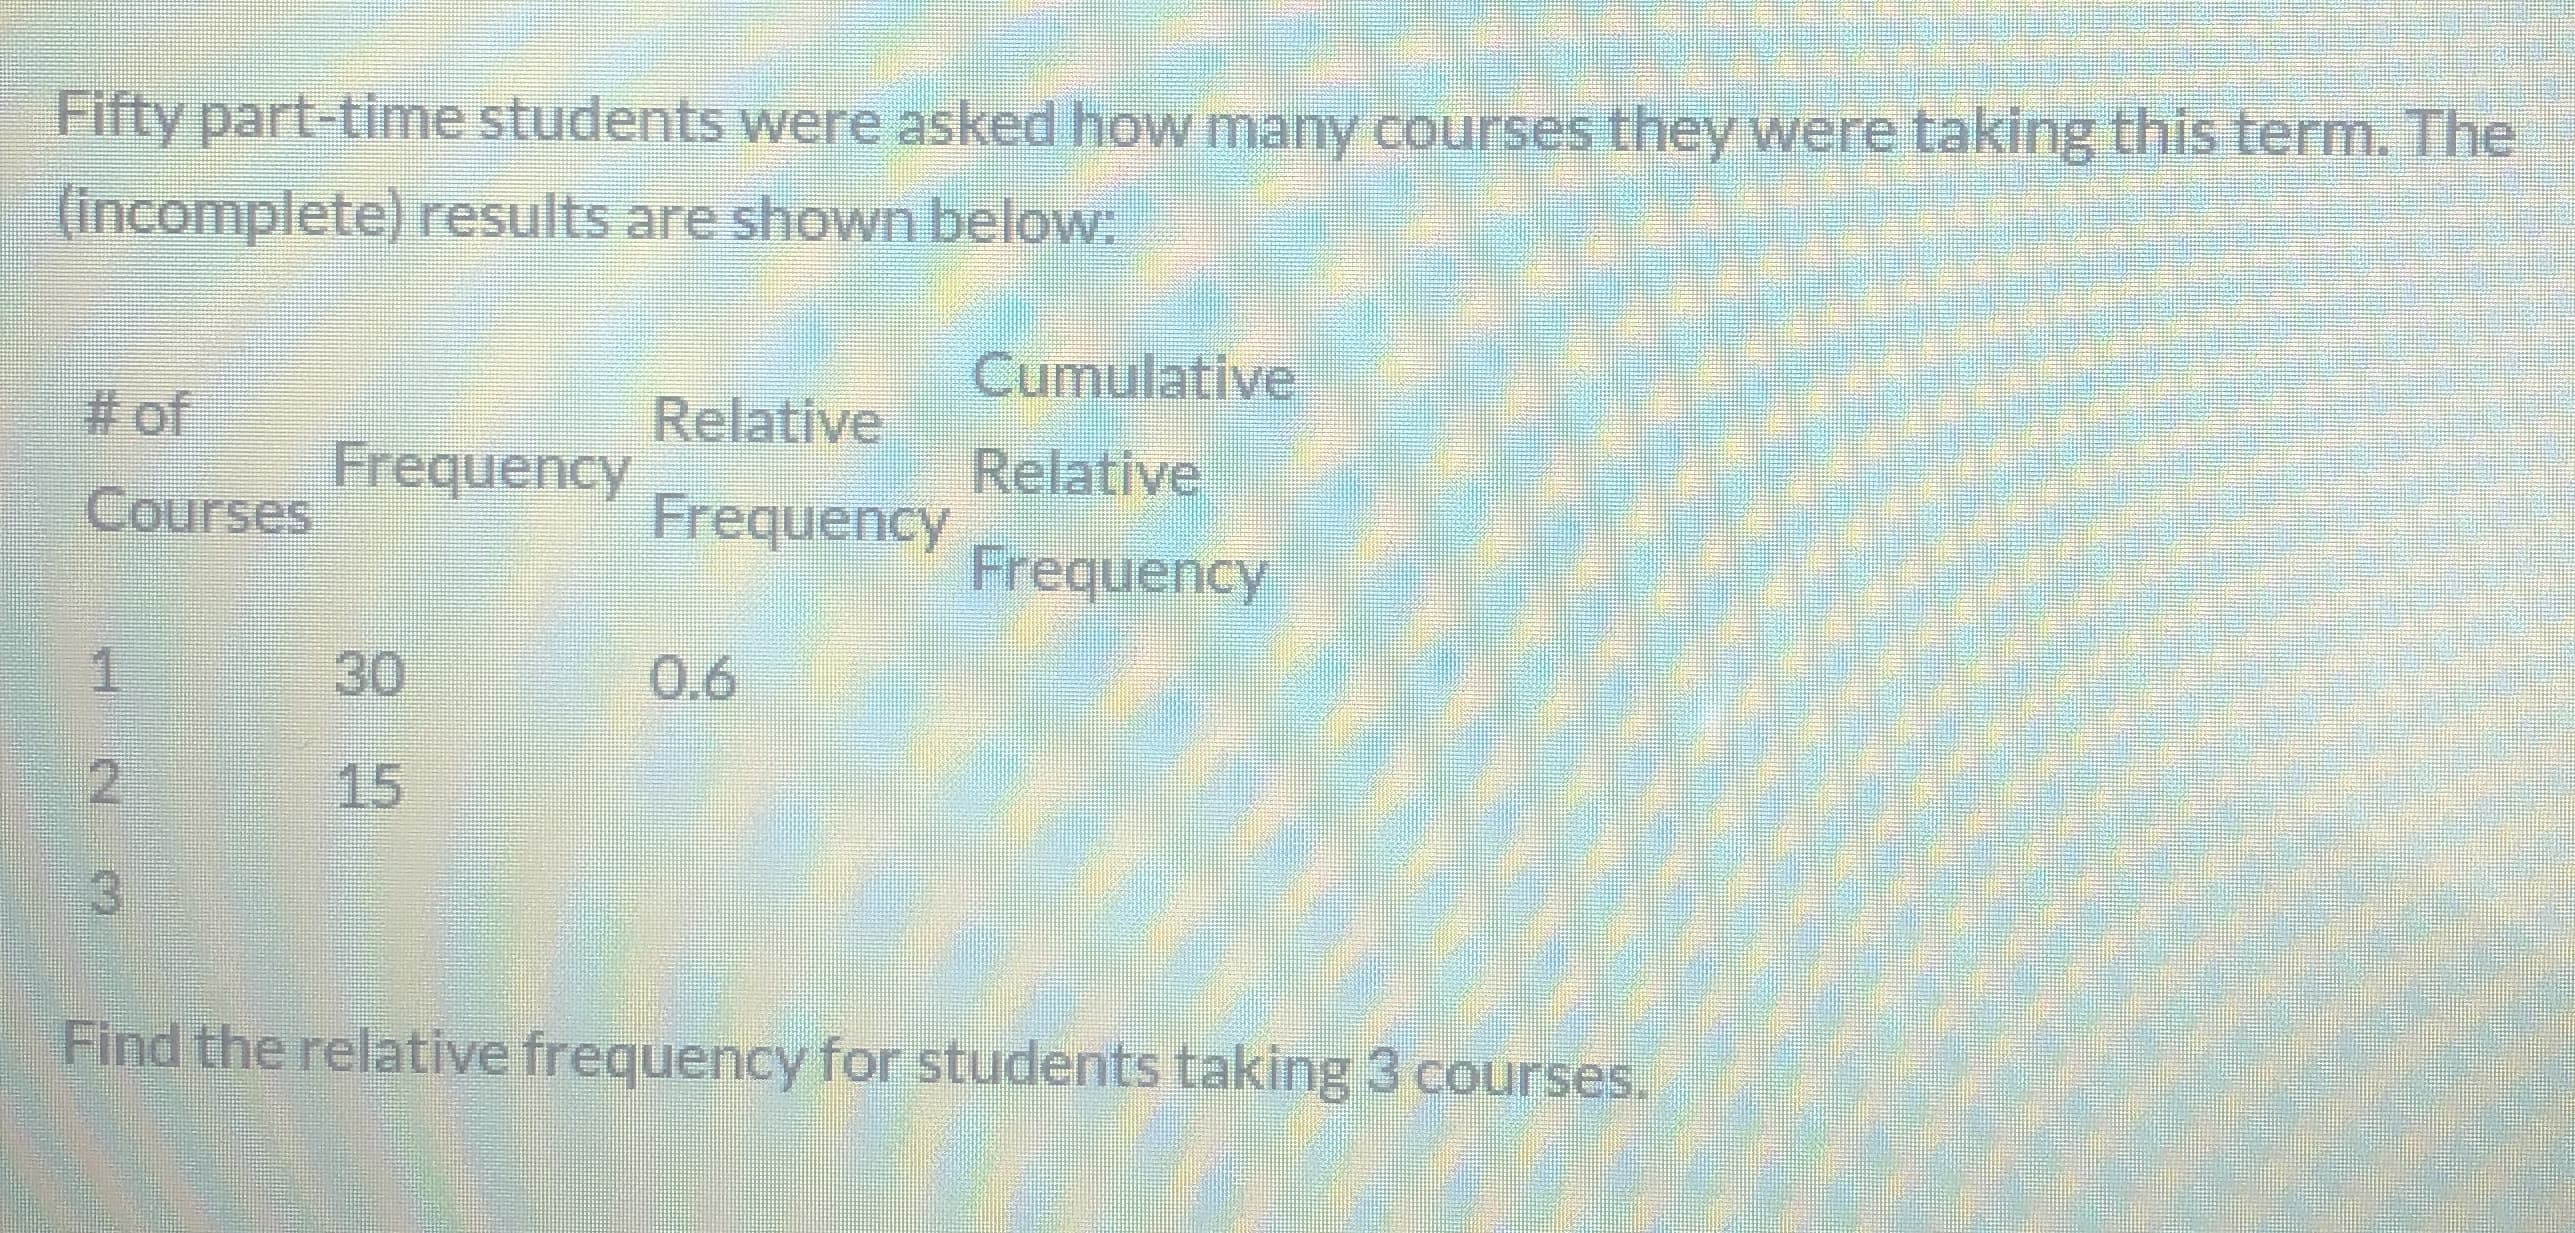 Cumulative
# of
Relative
Frequency
Relative
Courses
Frequency
Frequency
30
0.6
15
3)
Find the relative frequency for students taking 3 courses.
1.
2.
